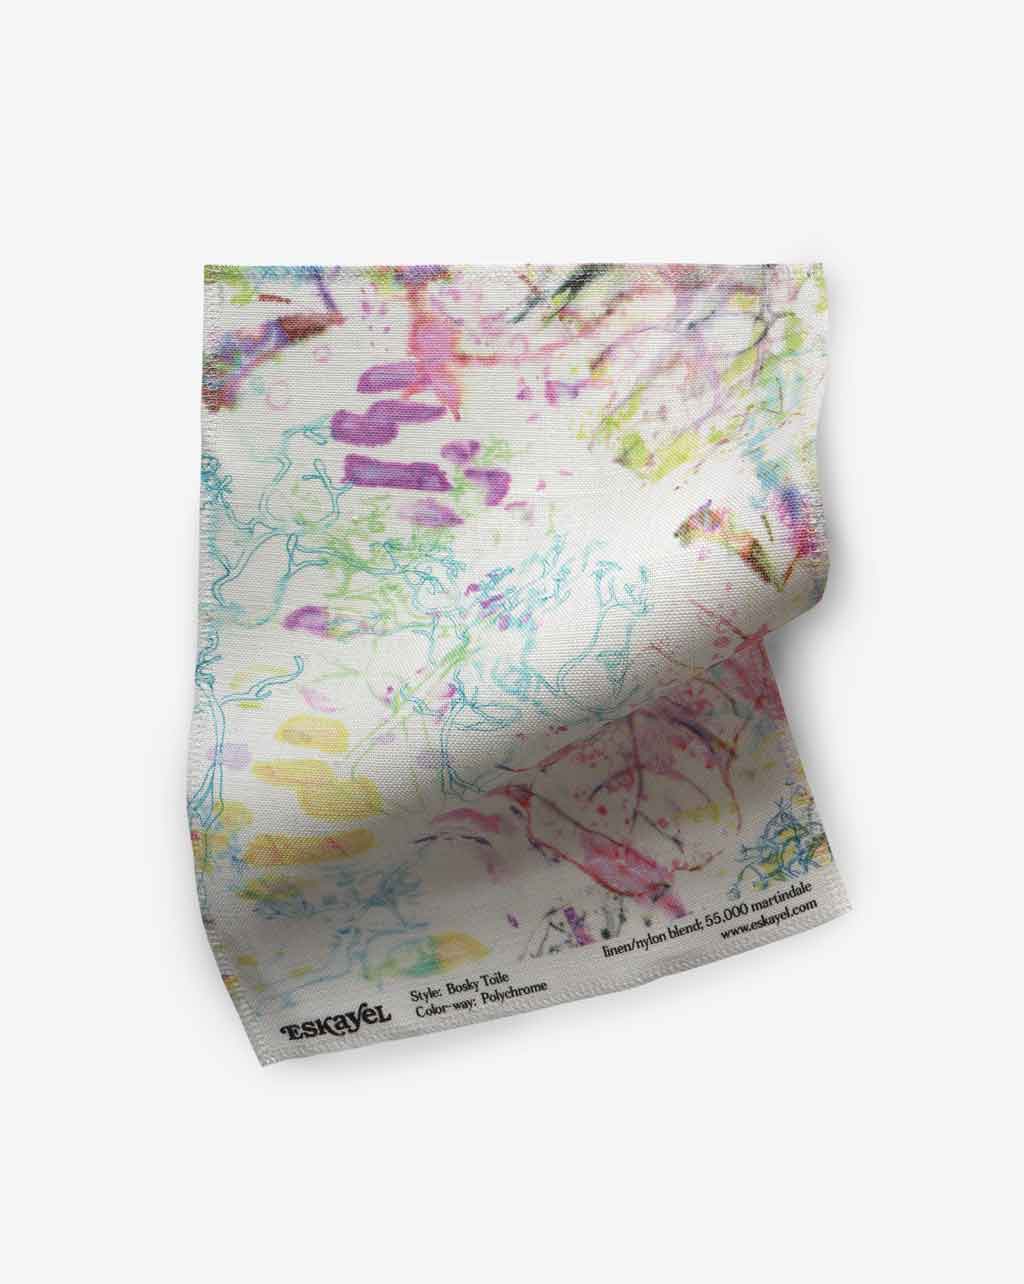 a Bosky Toile Fabric Sample Polychrome to see a piece of fabric with colorful paint on it